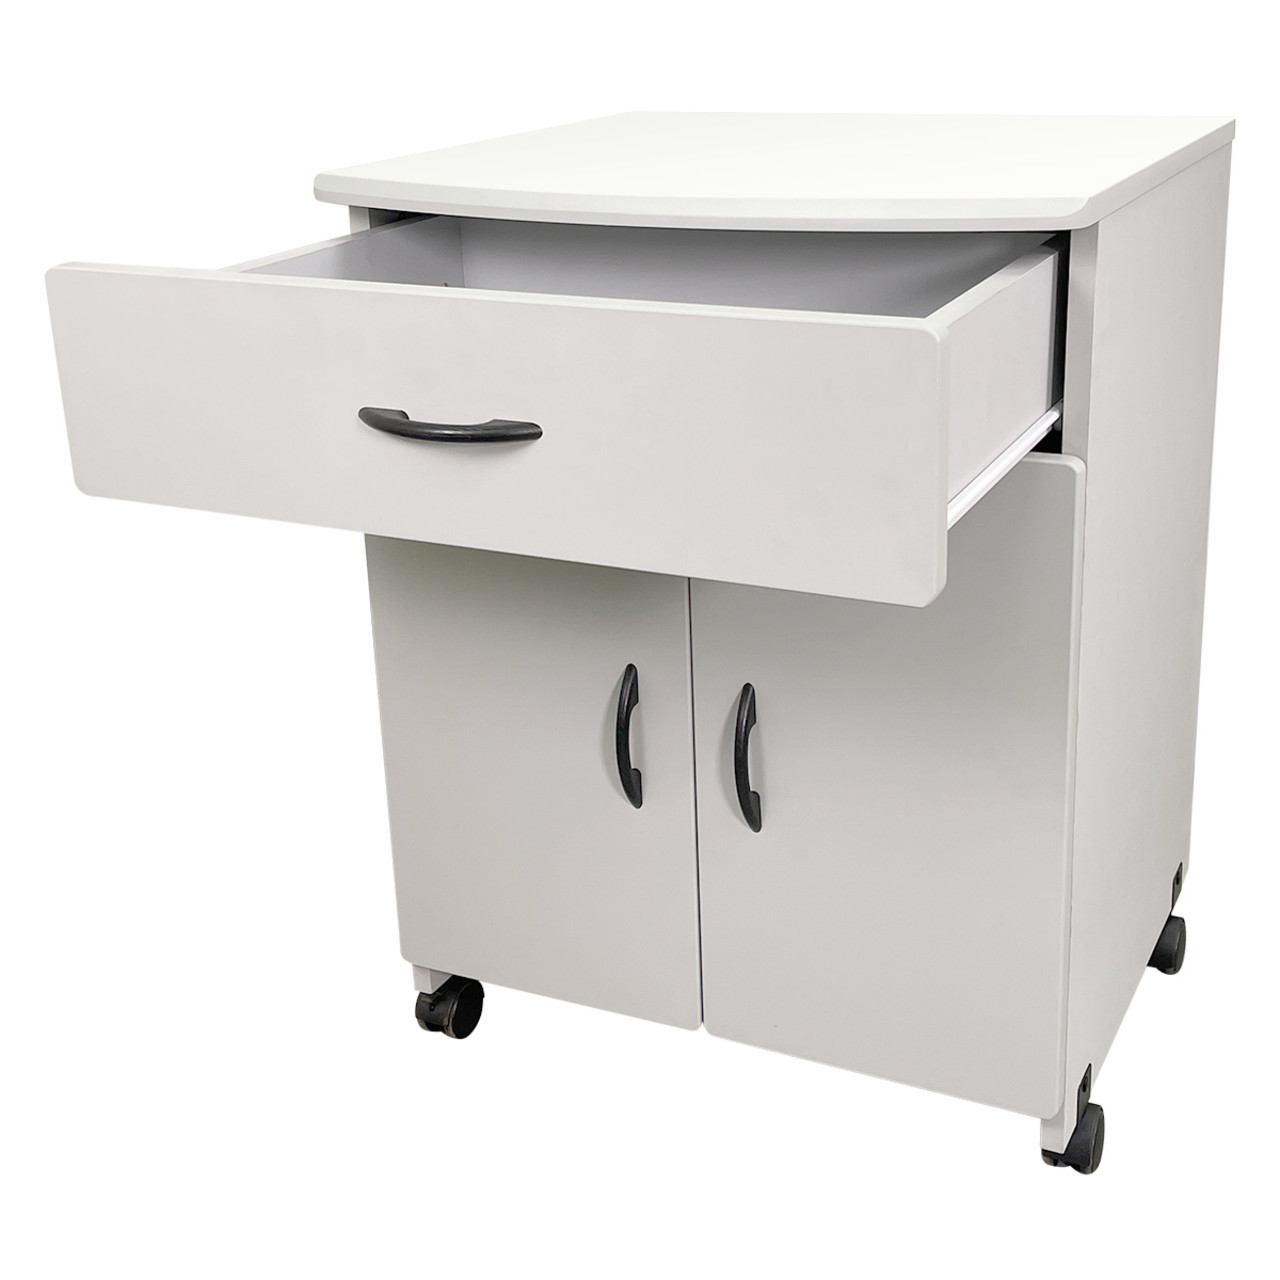 Buddy Products Gray Wood Laser Printer and Copier Stand - 31.1 x 23 x 23